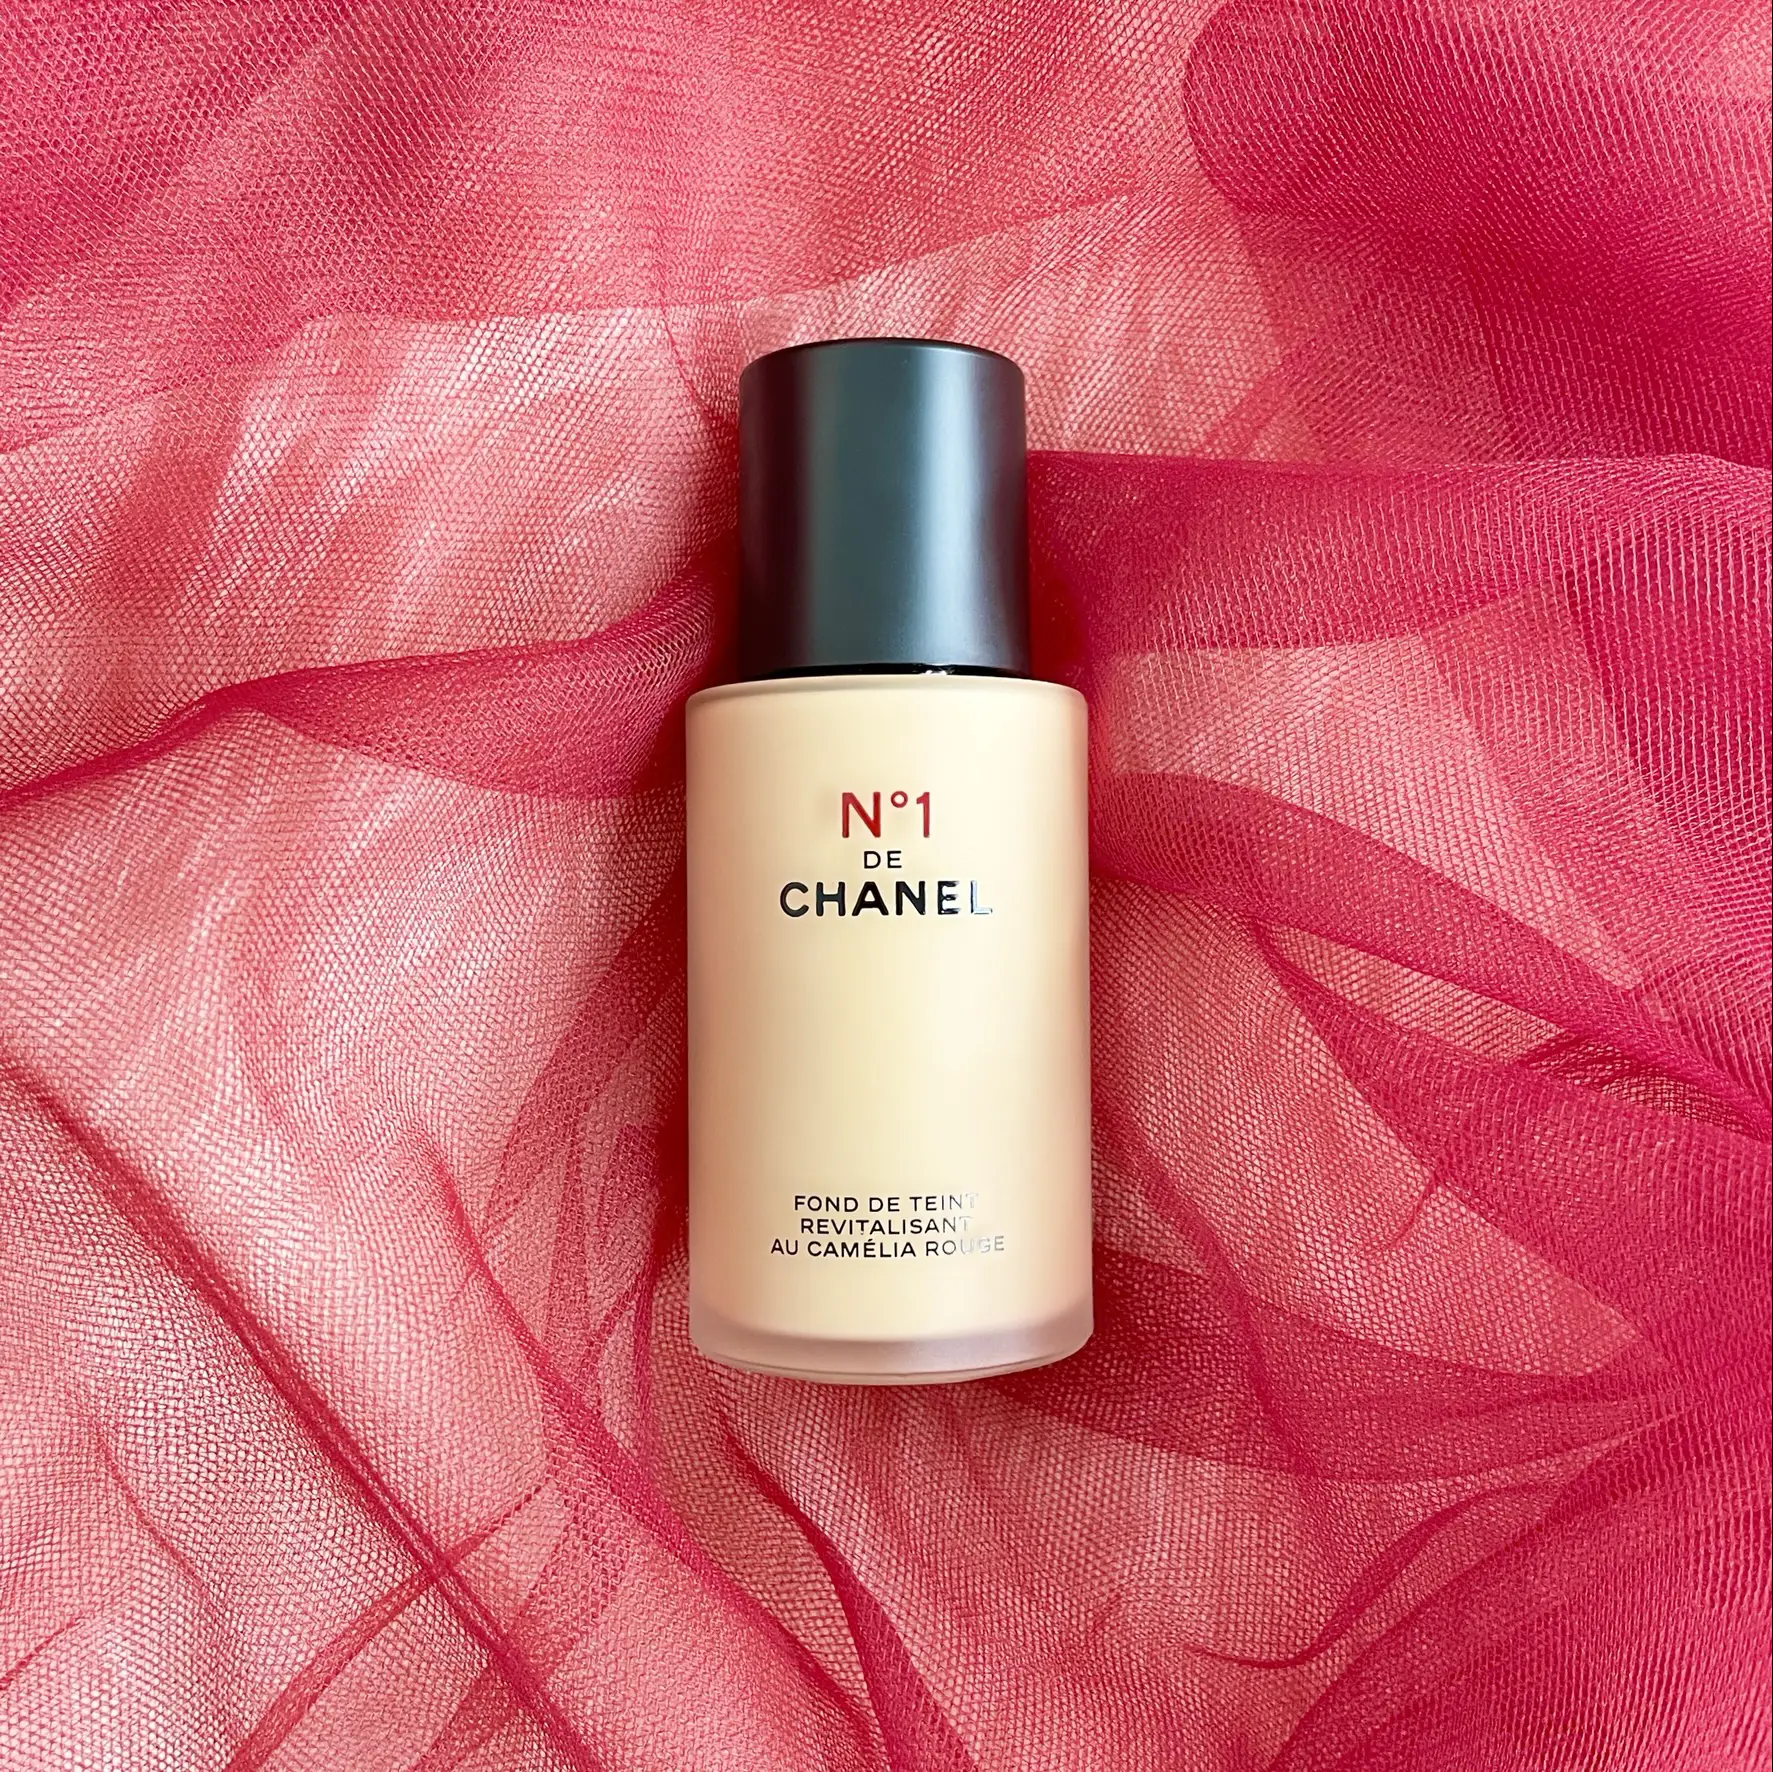 CHANEL 🖤 N°1 DE CHANEL REVITALIZING FOUNDATION, Gallery posted by  NattapornJade